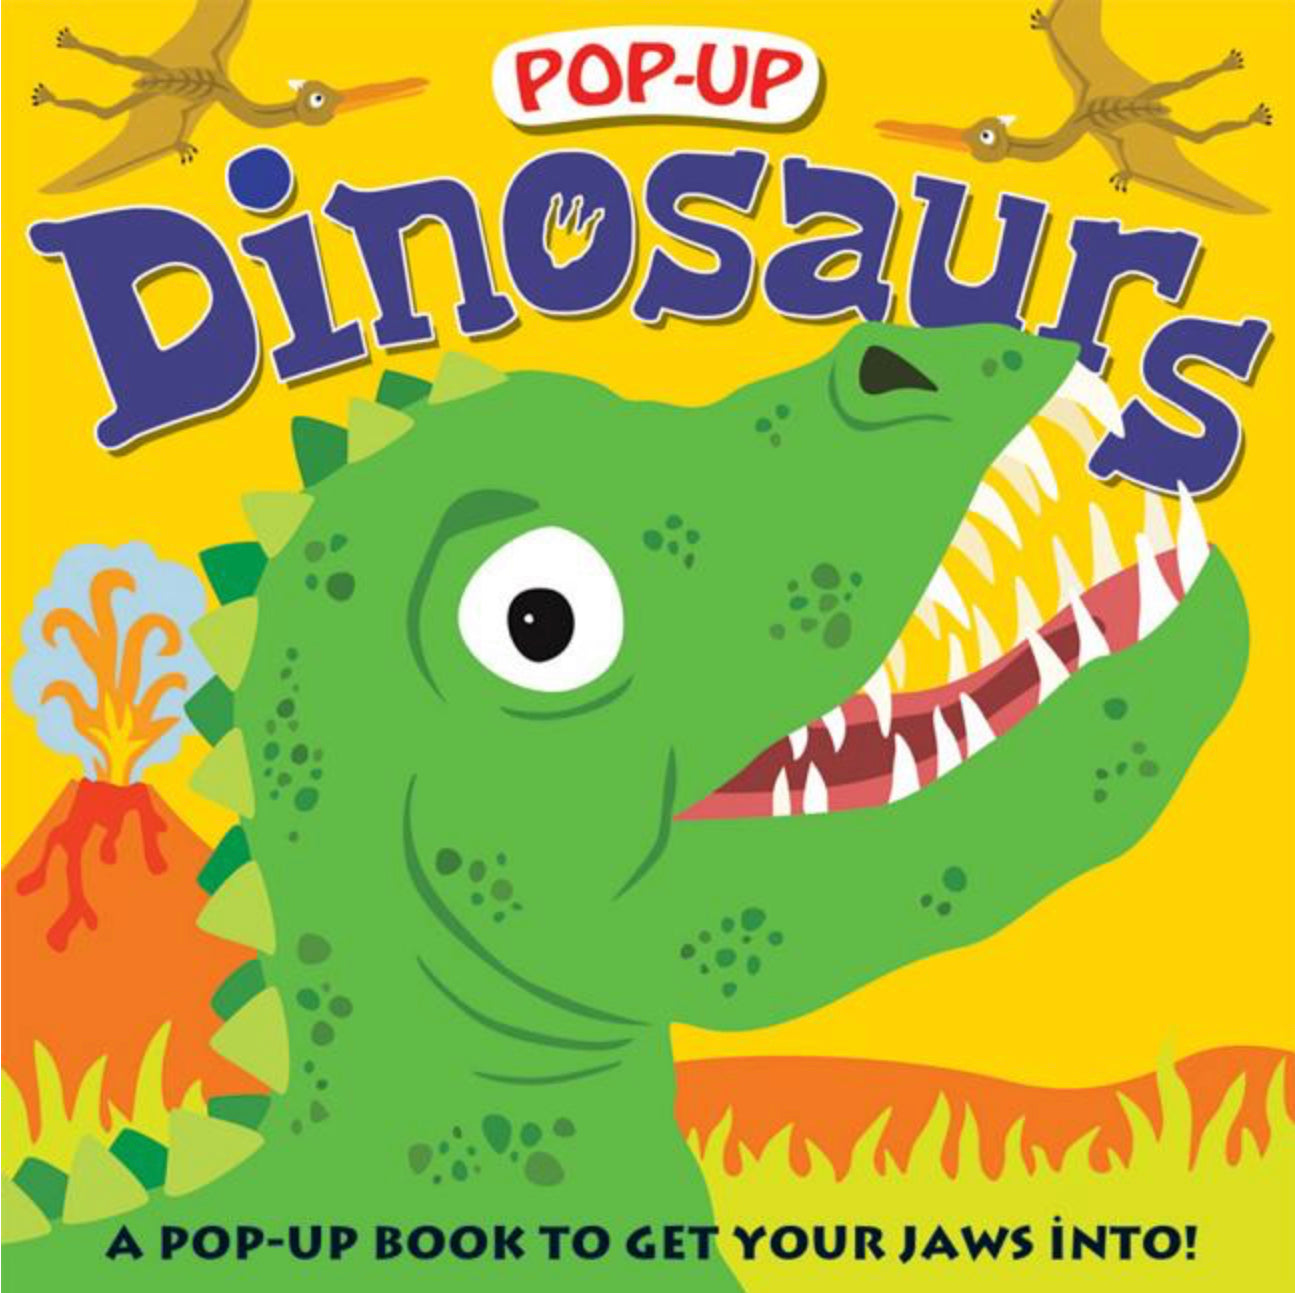 Pop-Up Dinosaurs: A Pop-Up Book to Get Your Jaws Into (Priddy Pop-Up), Roger Priddy